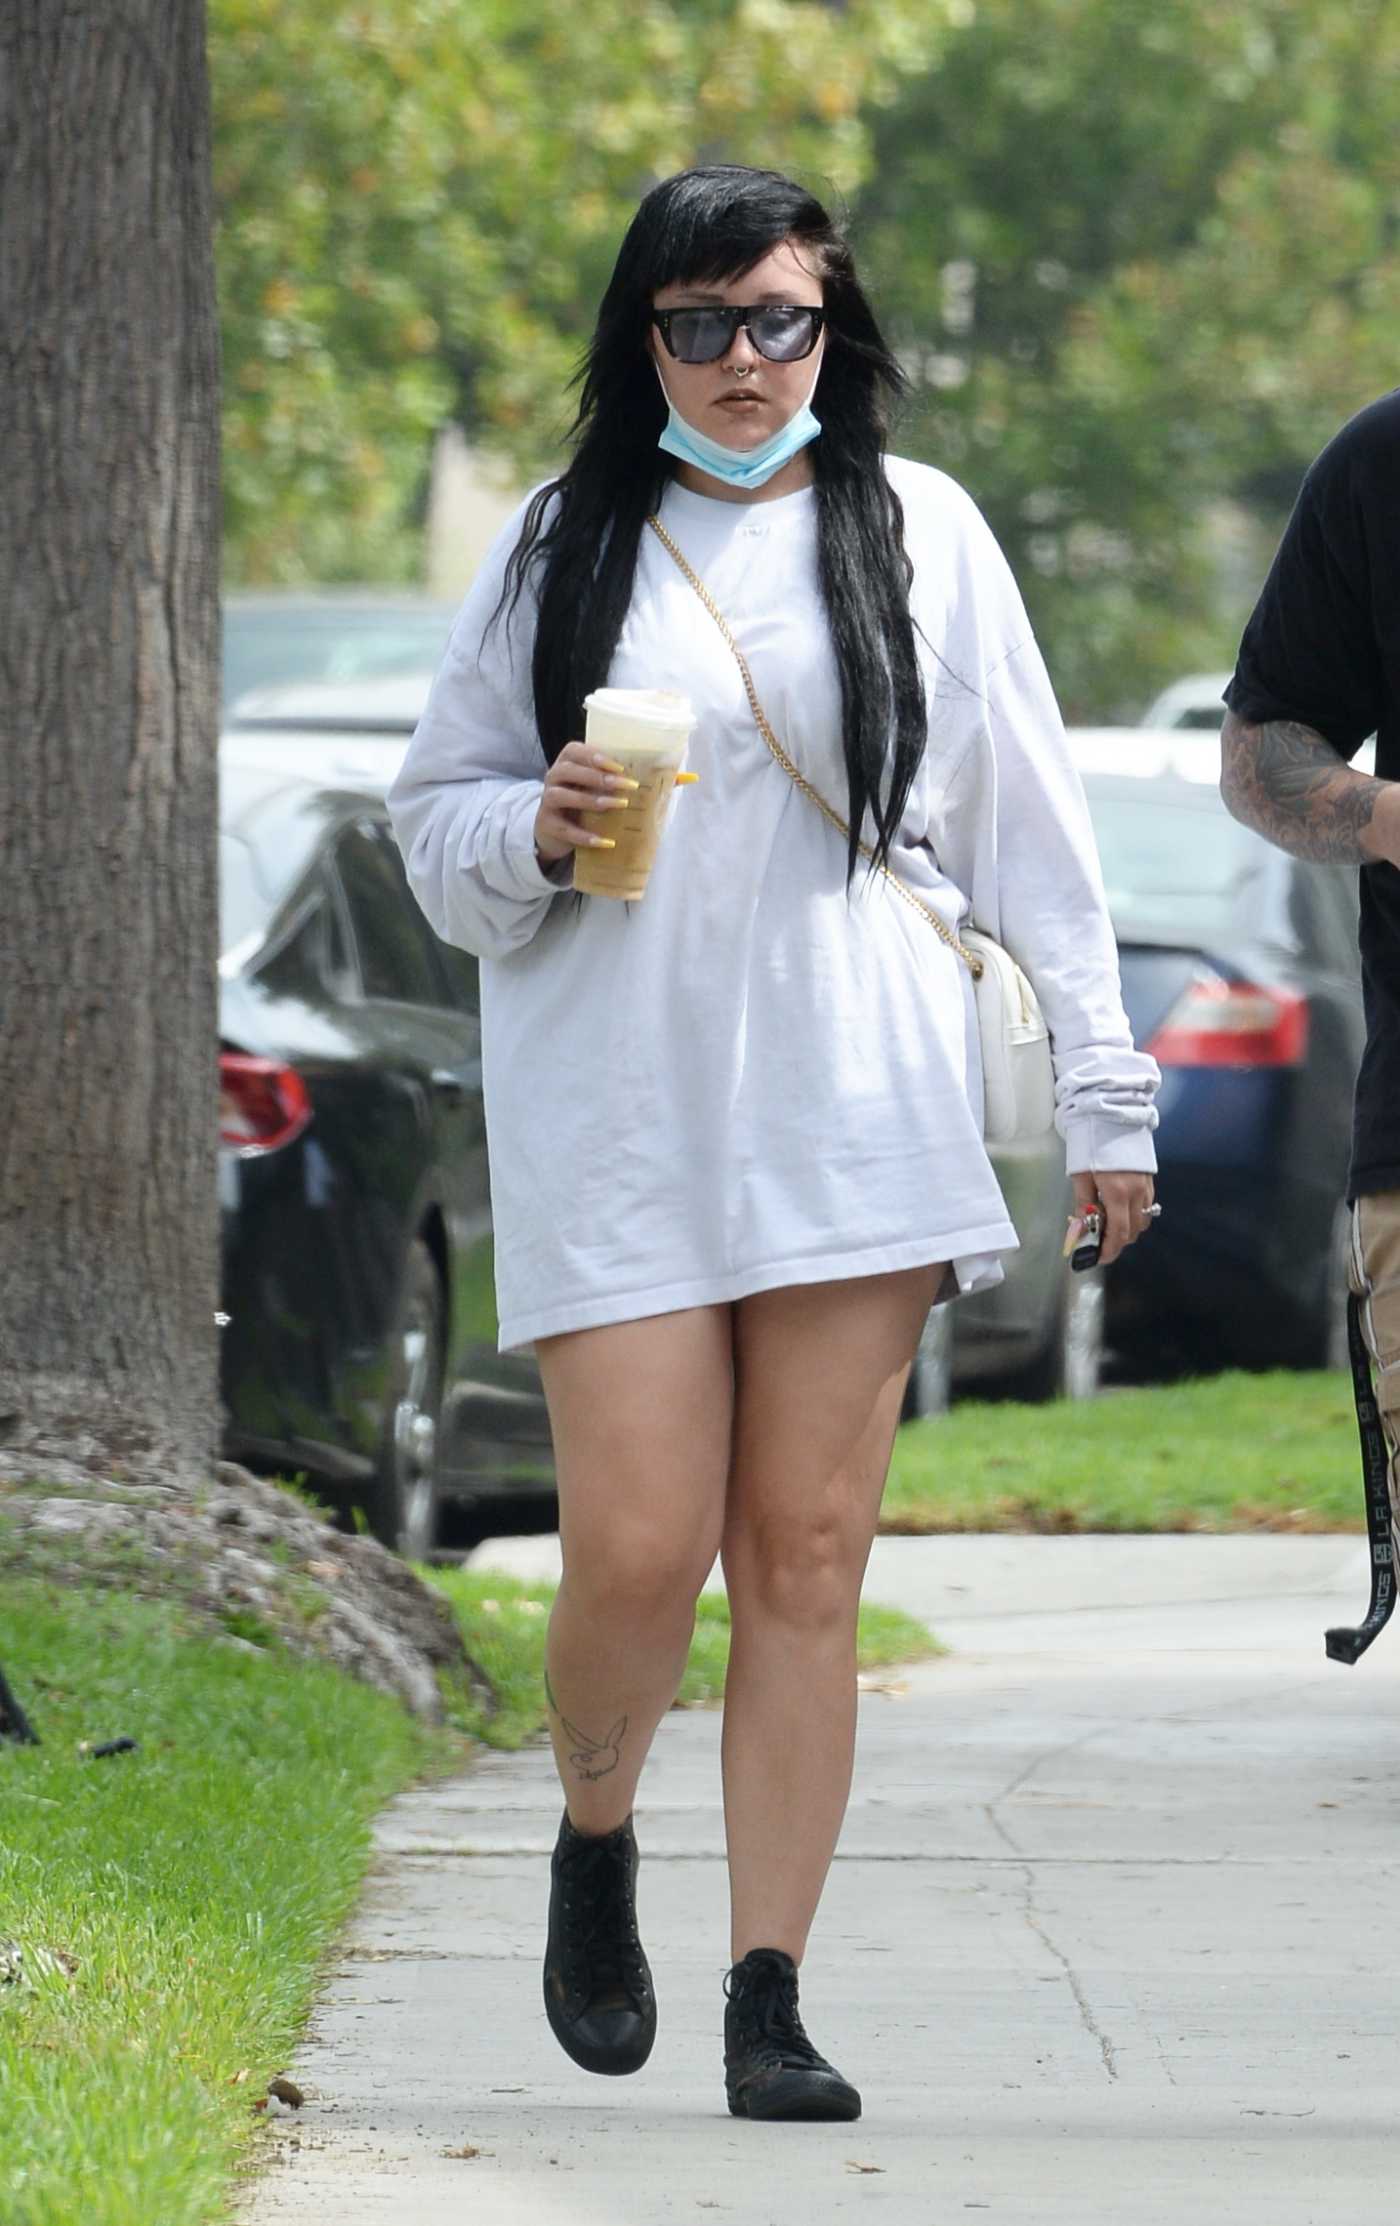 Amanda Bynes in a White Sweatshirt Was Seen Out with Paul Michael in West Hollywood 09/30/2021